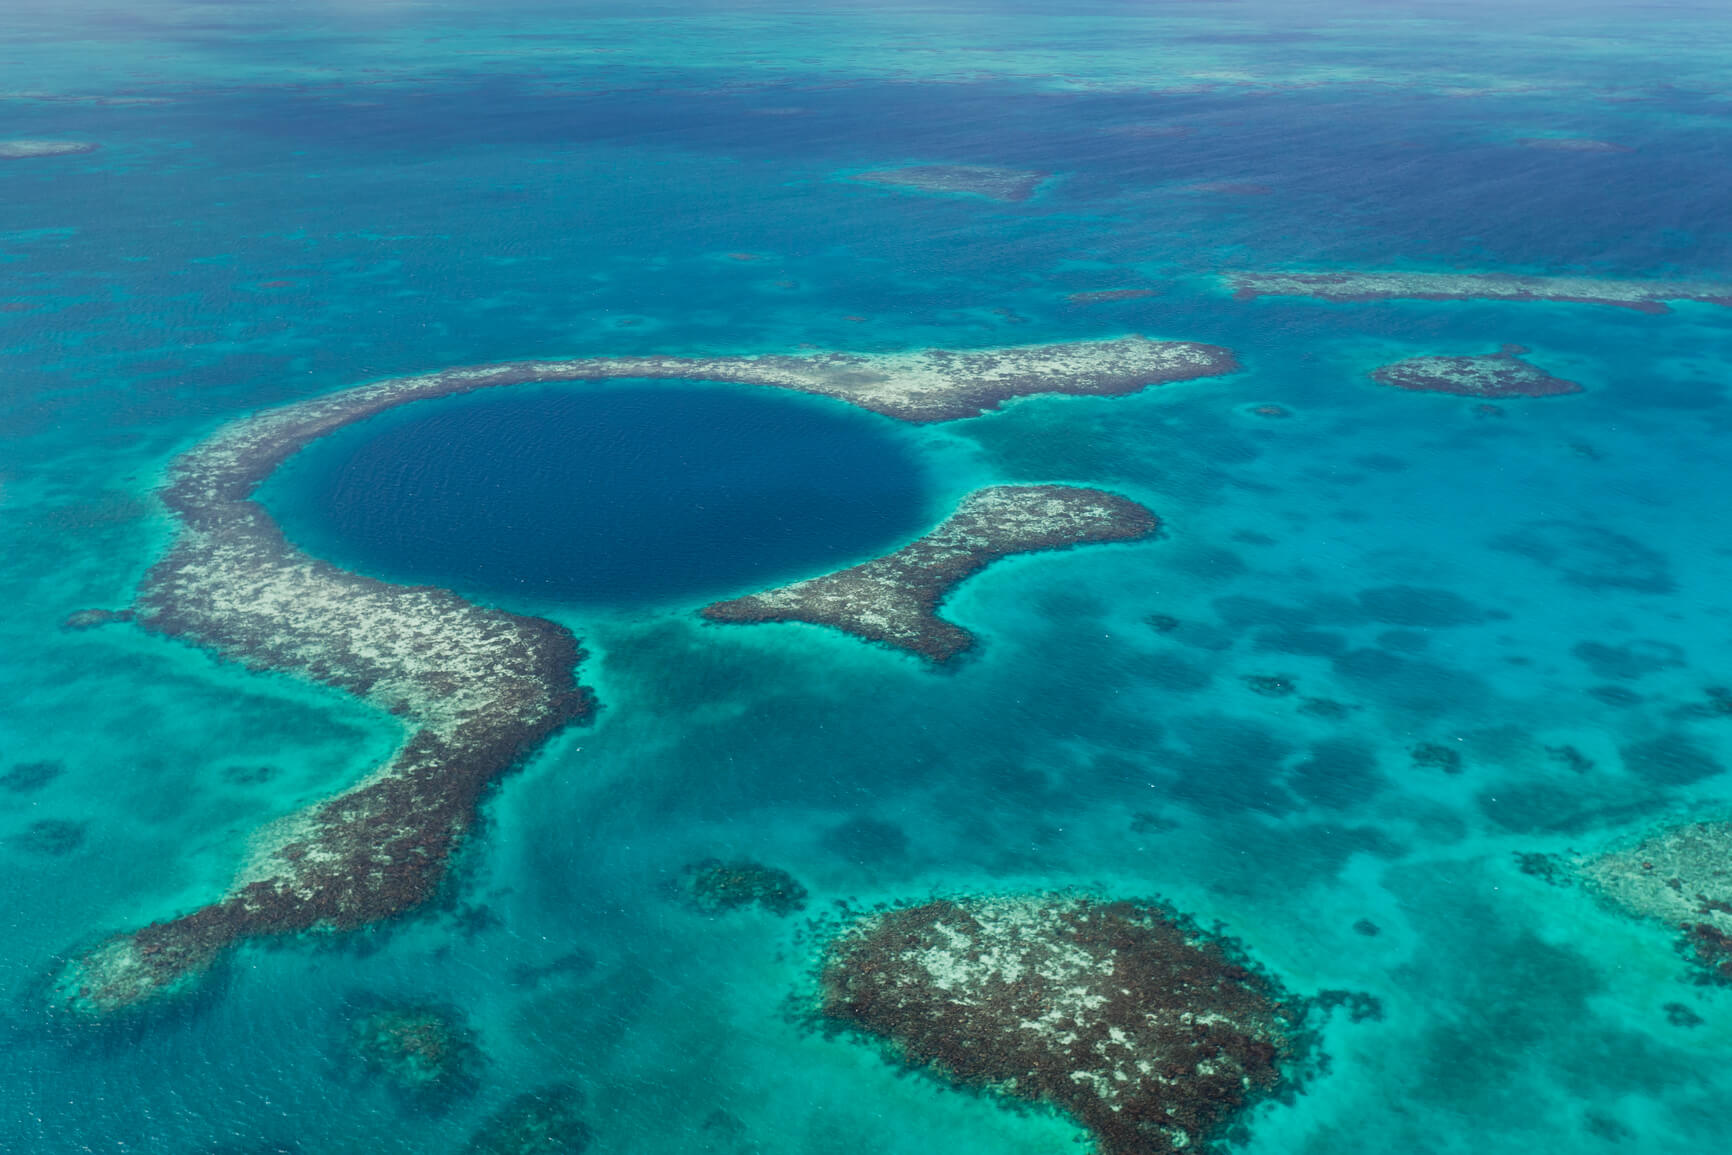 Houston, Texas to Belize City, Belize for only $292 roundtrip